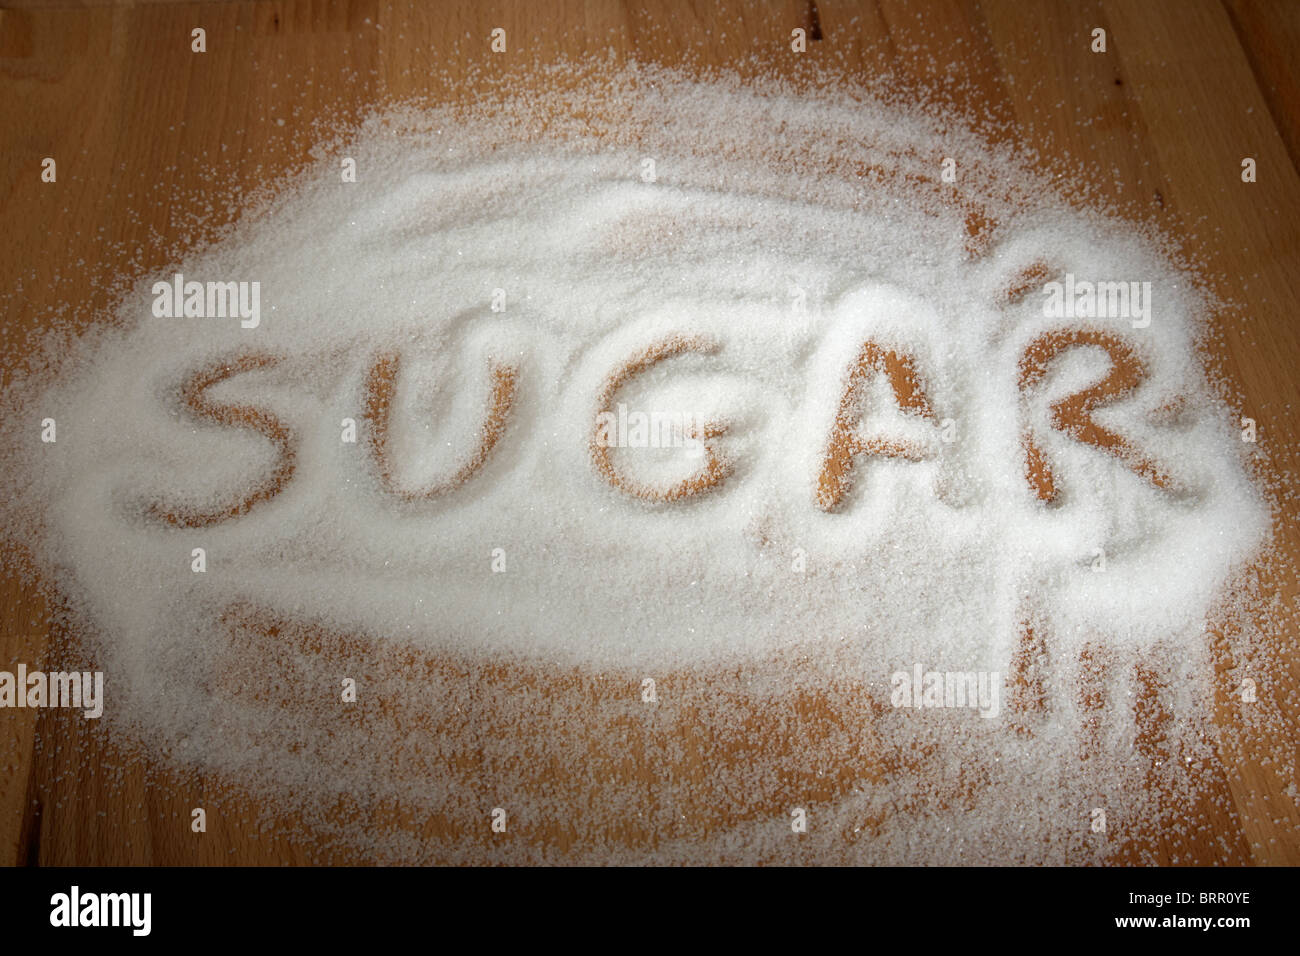 sugar spelt out with spilled pile of granulated sugar Stock Photo